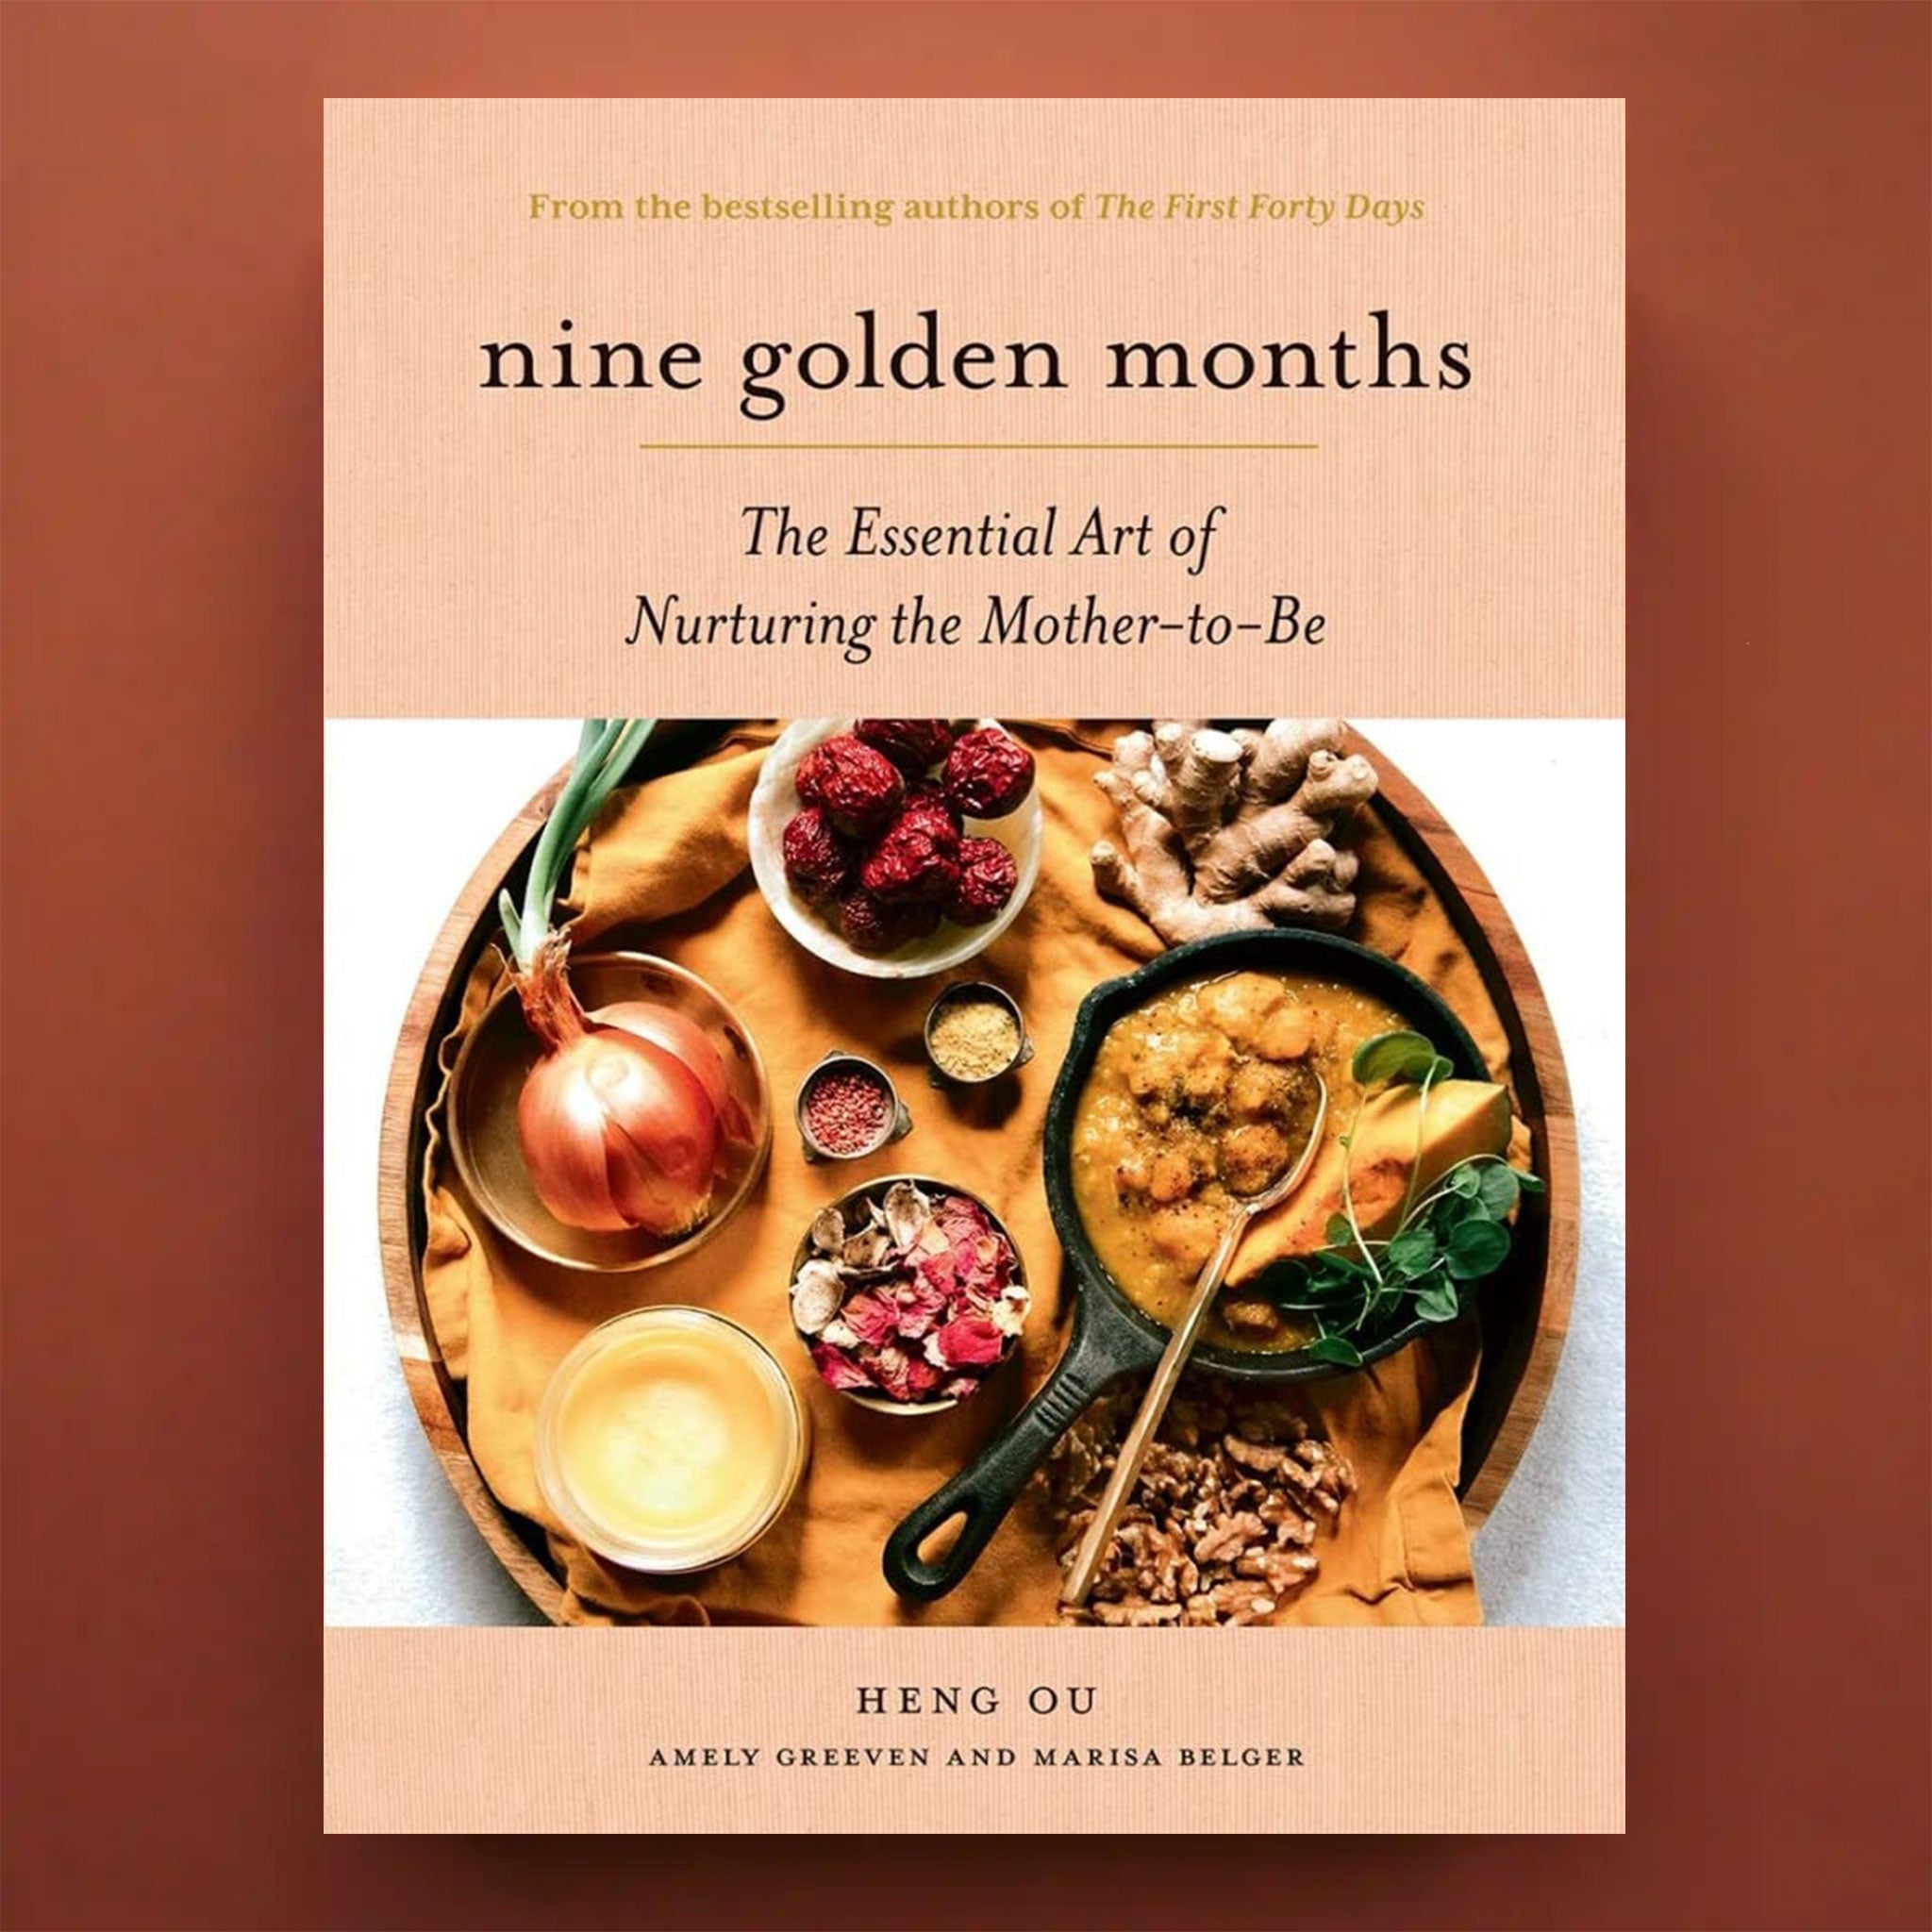 On a brown background is a book with a plate of food and the title at the top that reads, &quot;nine golden months&quot;, &quot;The Essential Art of Nurturing the Mother-to-Be&quot;.